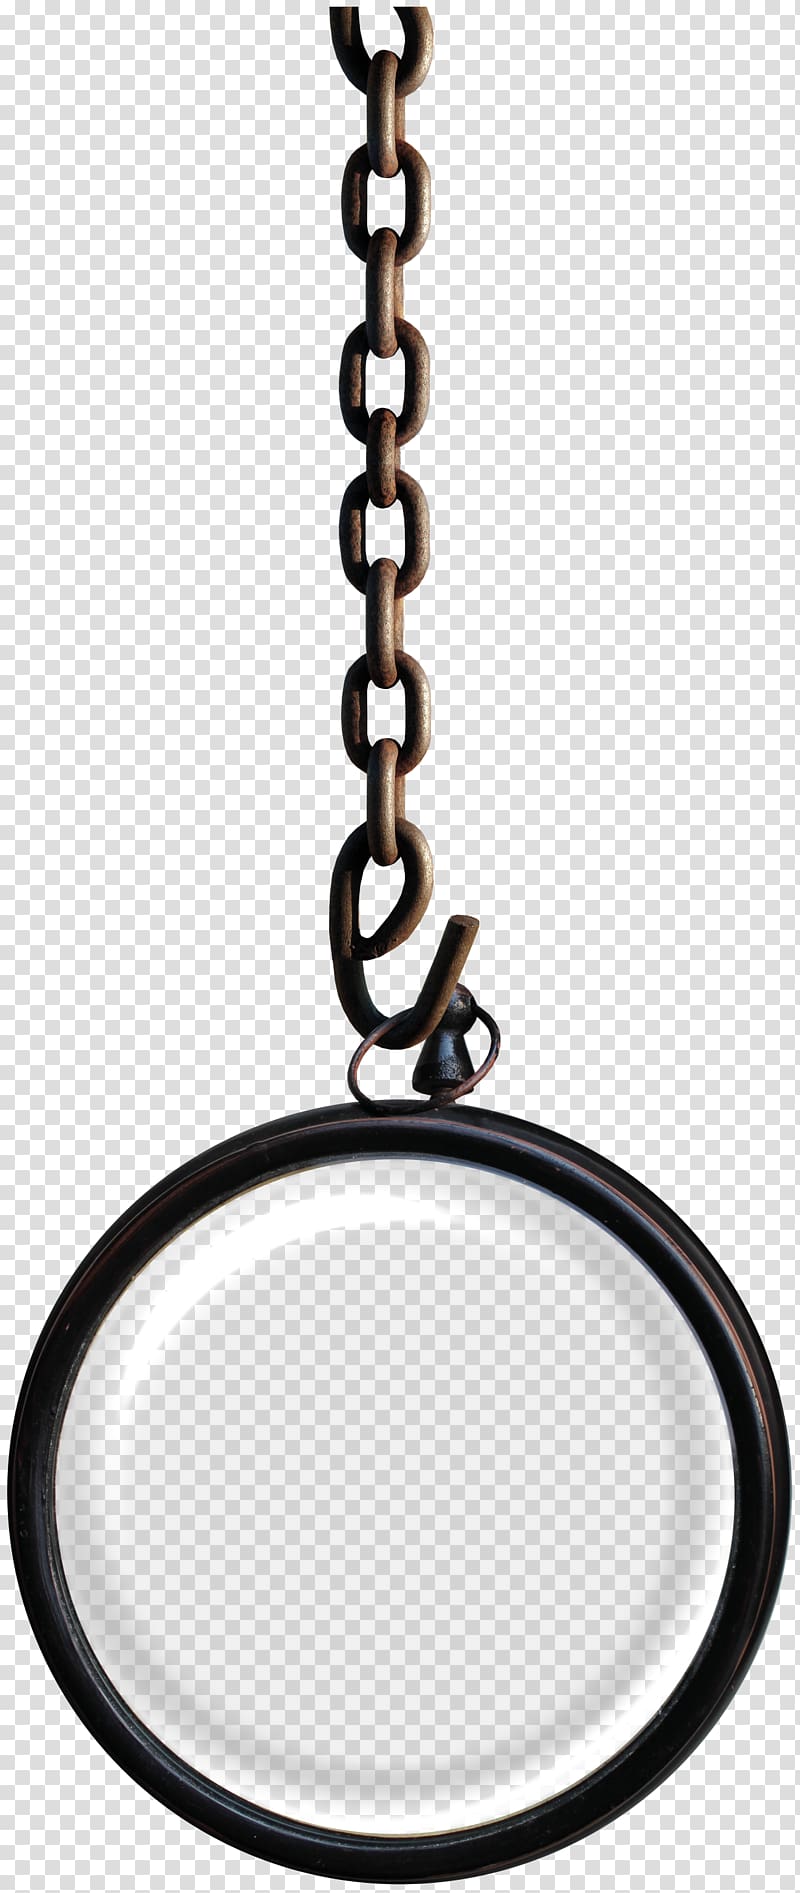 Chain Metal Ring, Metal rings pendants transparent background PNG clipart